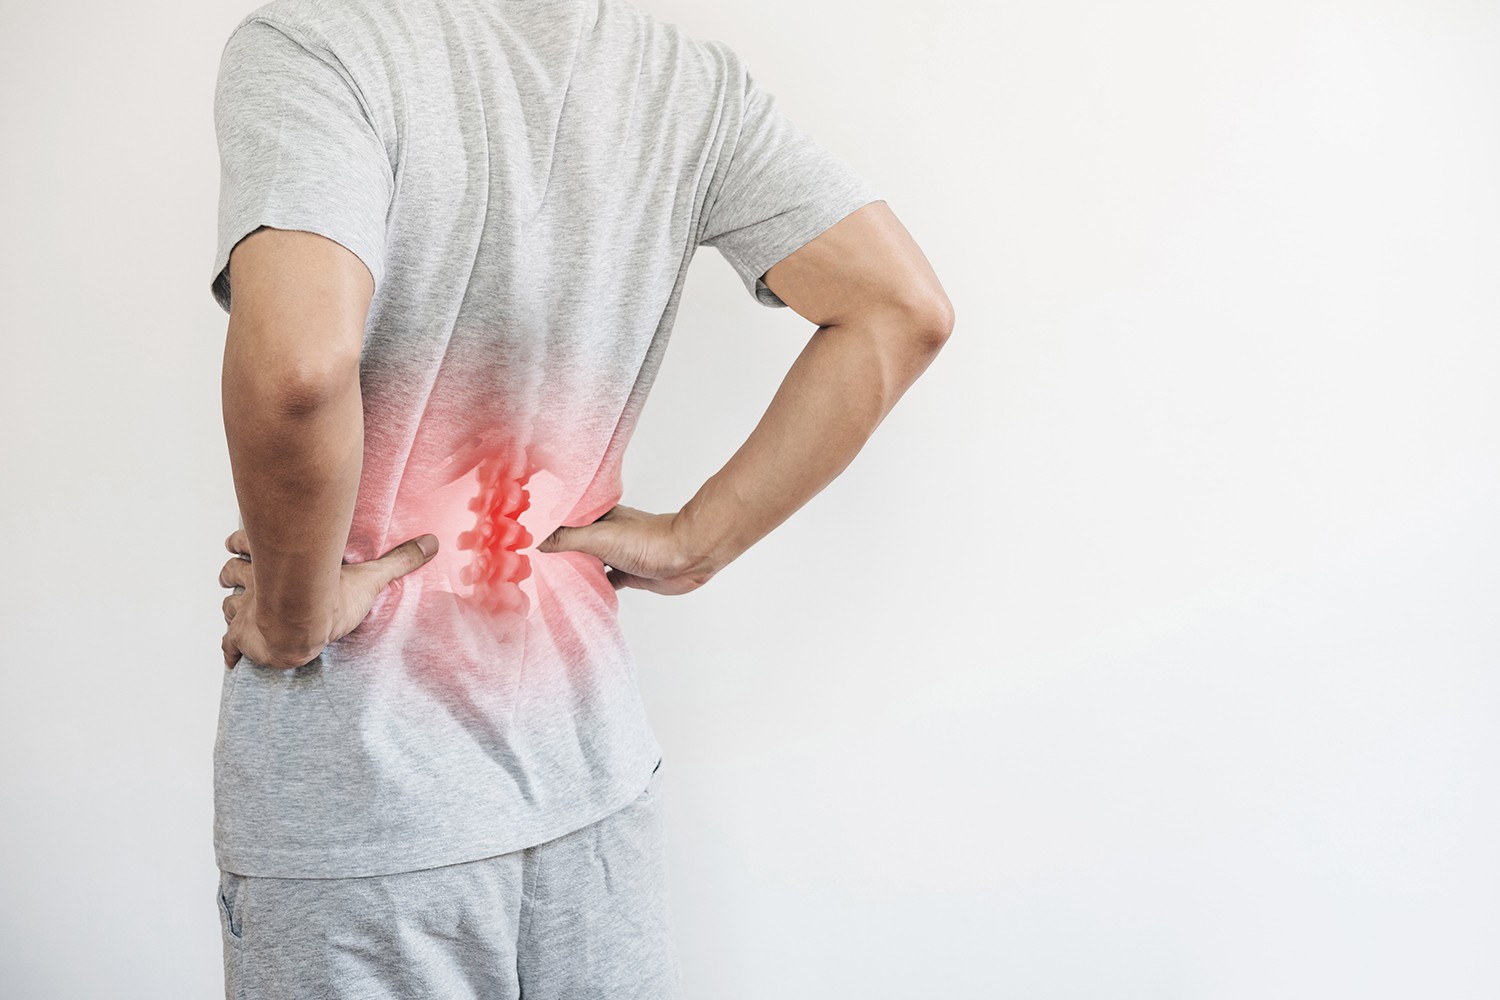 Back examination: low back pain and sciatica